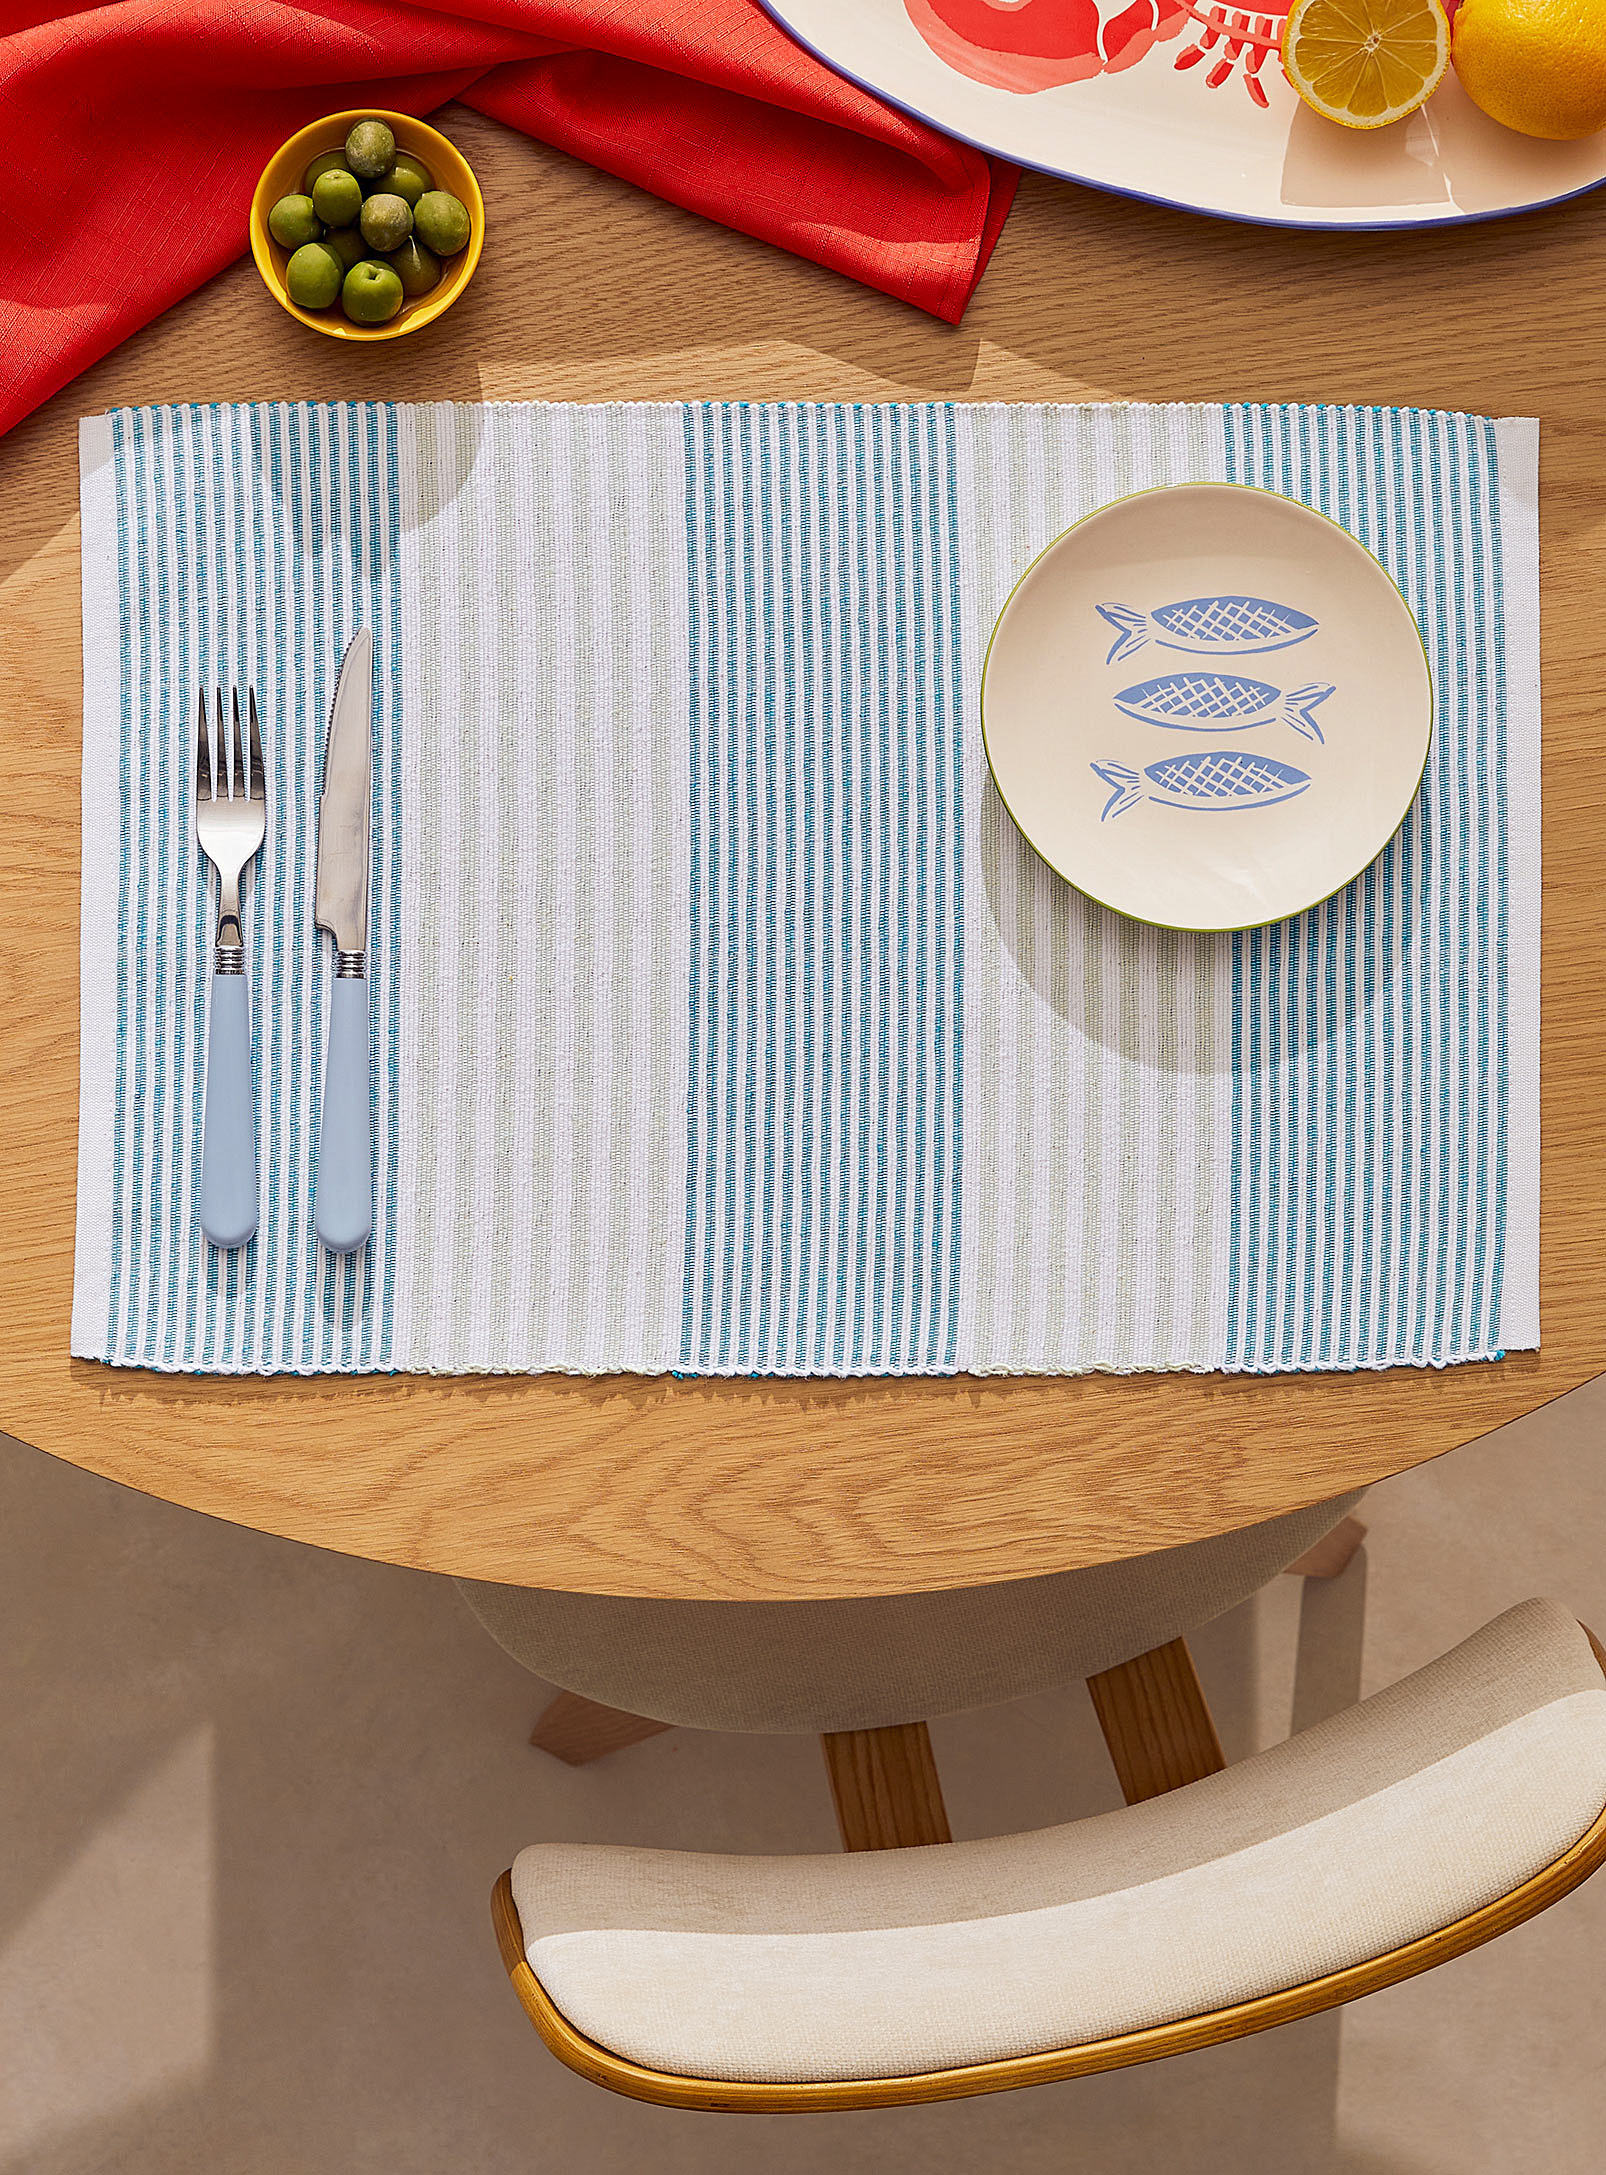 Simons Maison Summer Stripes Recycled Cotton Placemat In Patterned Blue